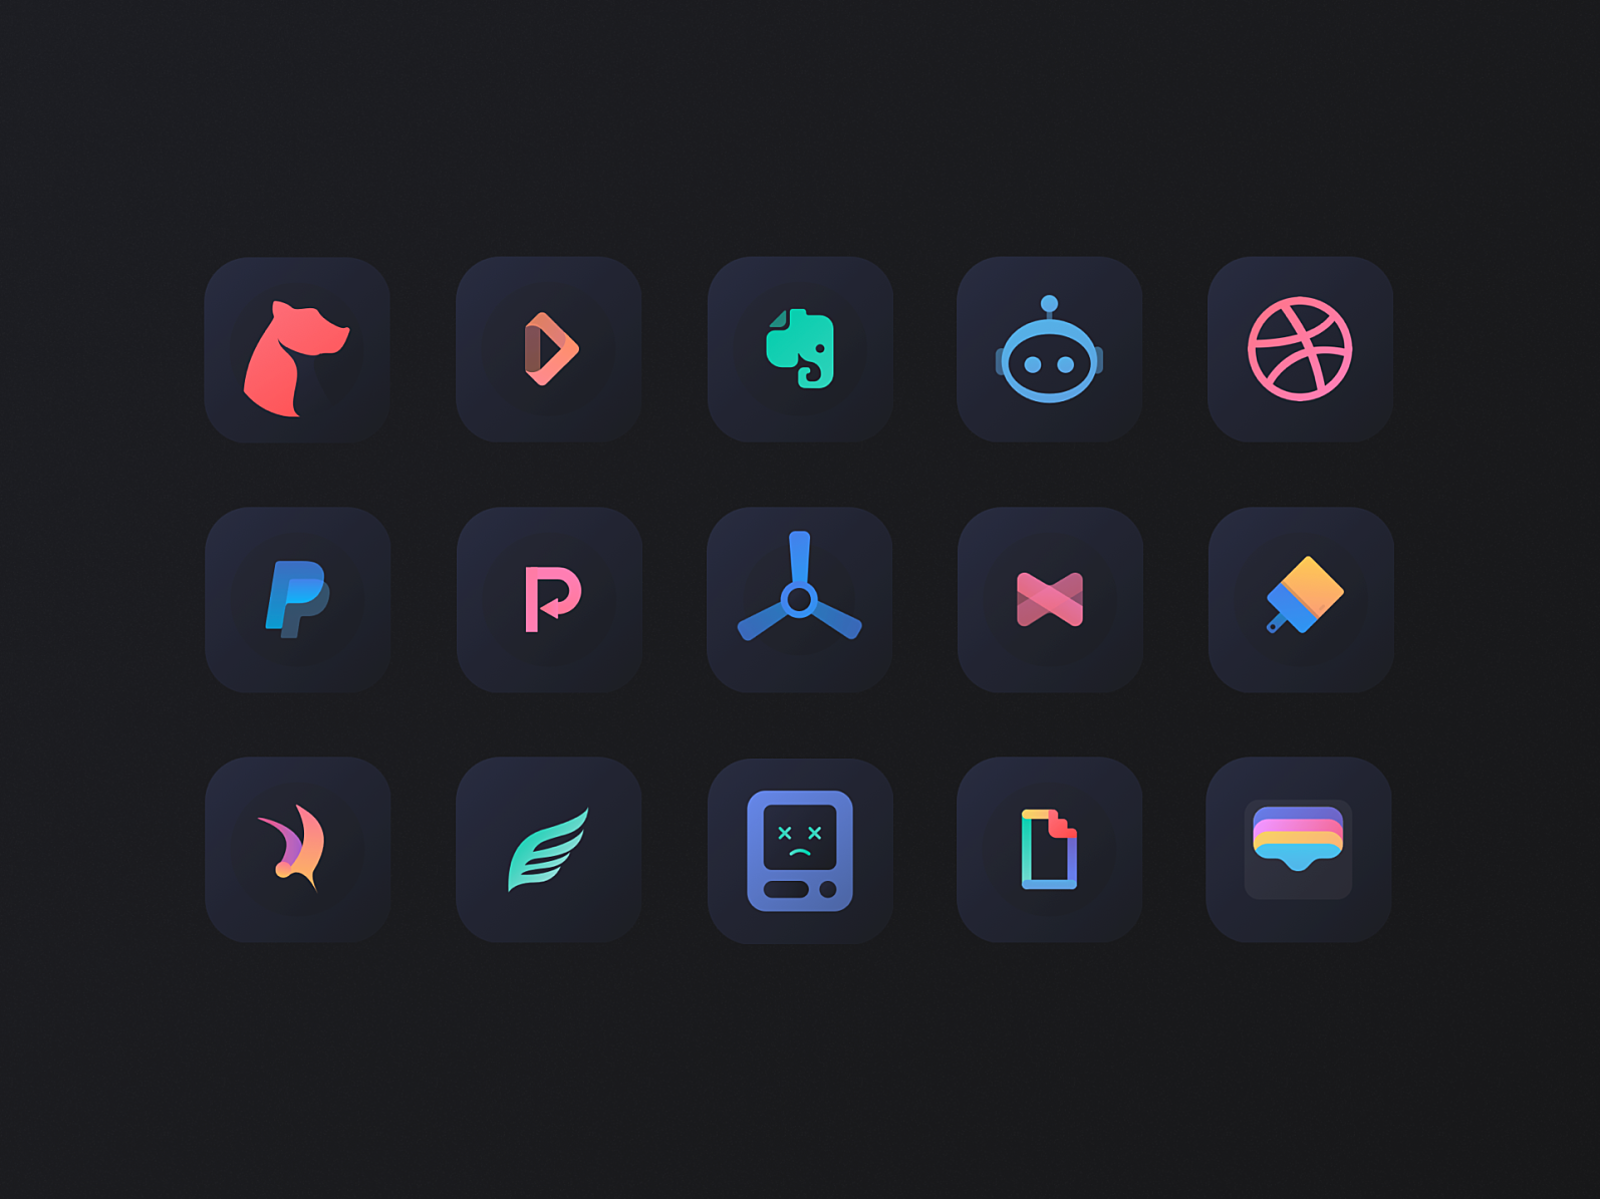 Viola Dark Icon Pack for iOS by Ahmed Bousrih on Dribbble